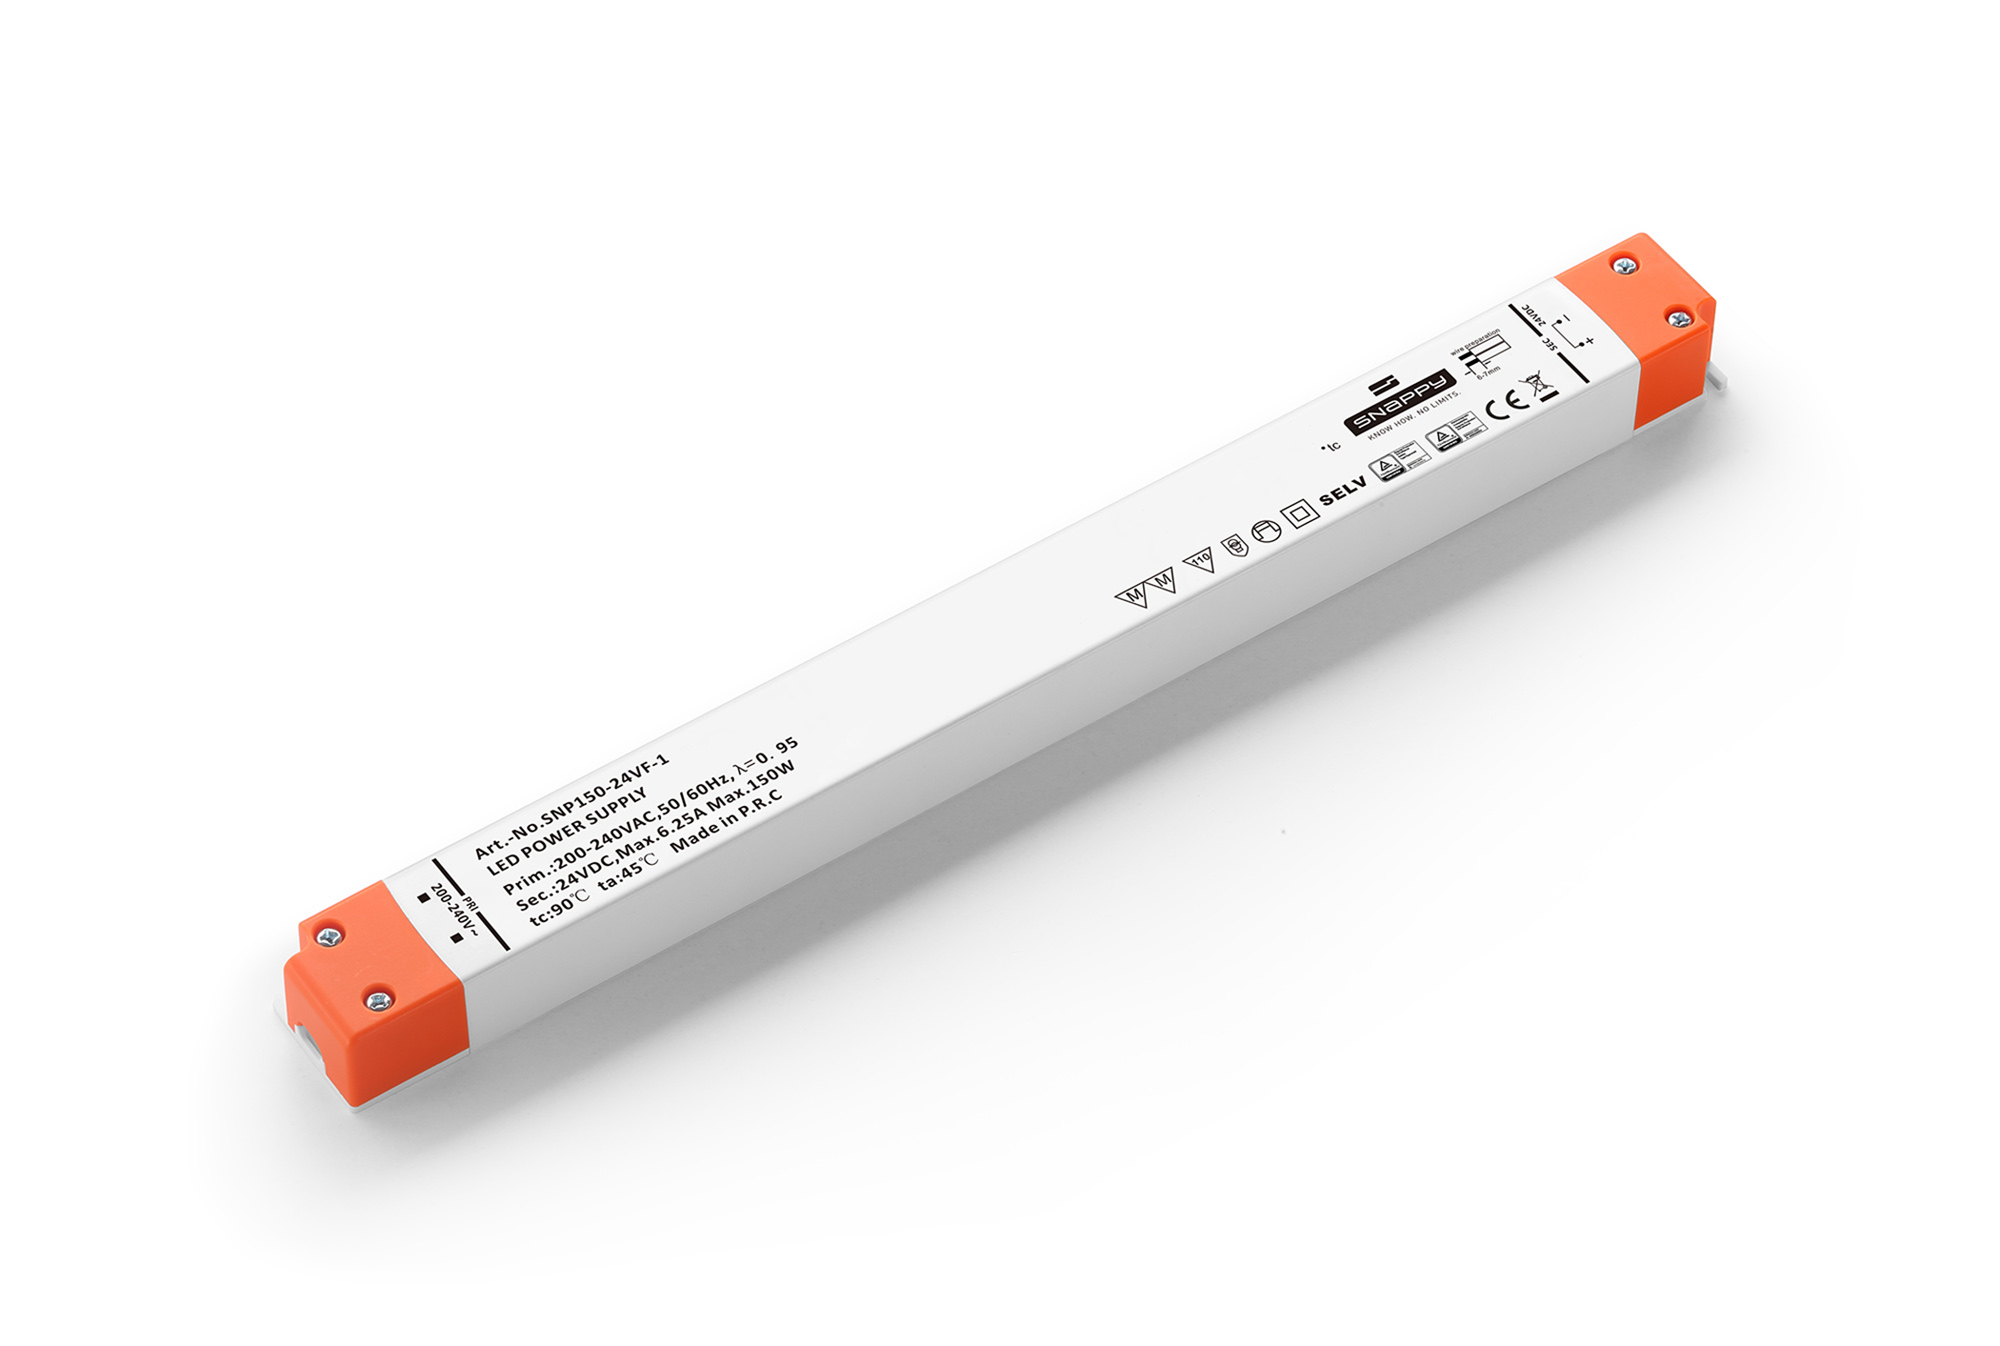 SNP150-24VF-1  SNP, 150W Constant Voltage Non-Dimmable LED Driver 24VDC 6.25A IP20.